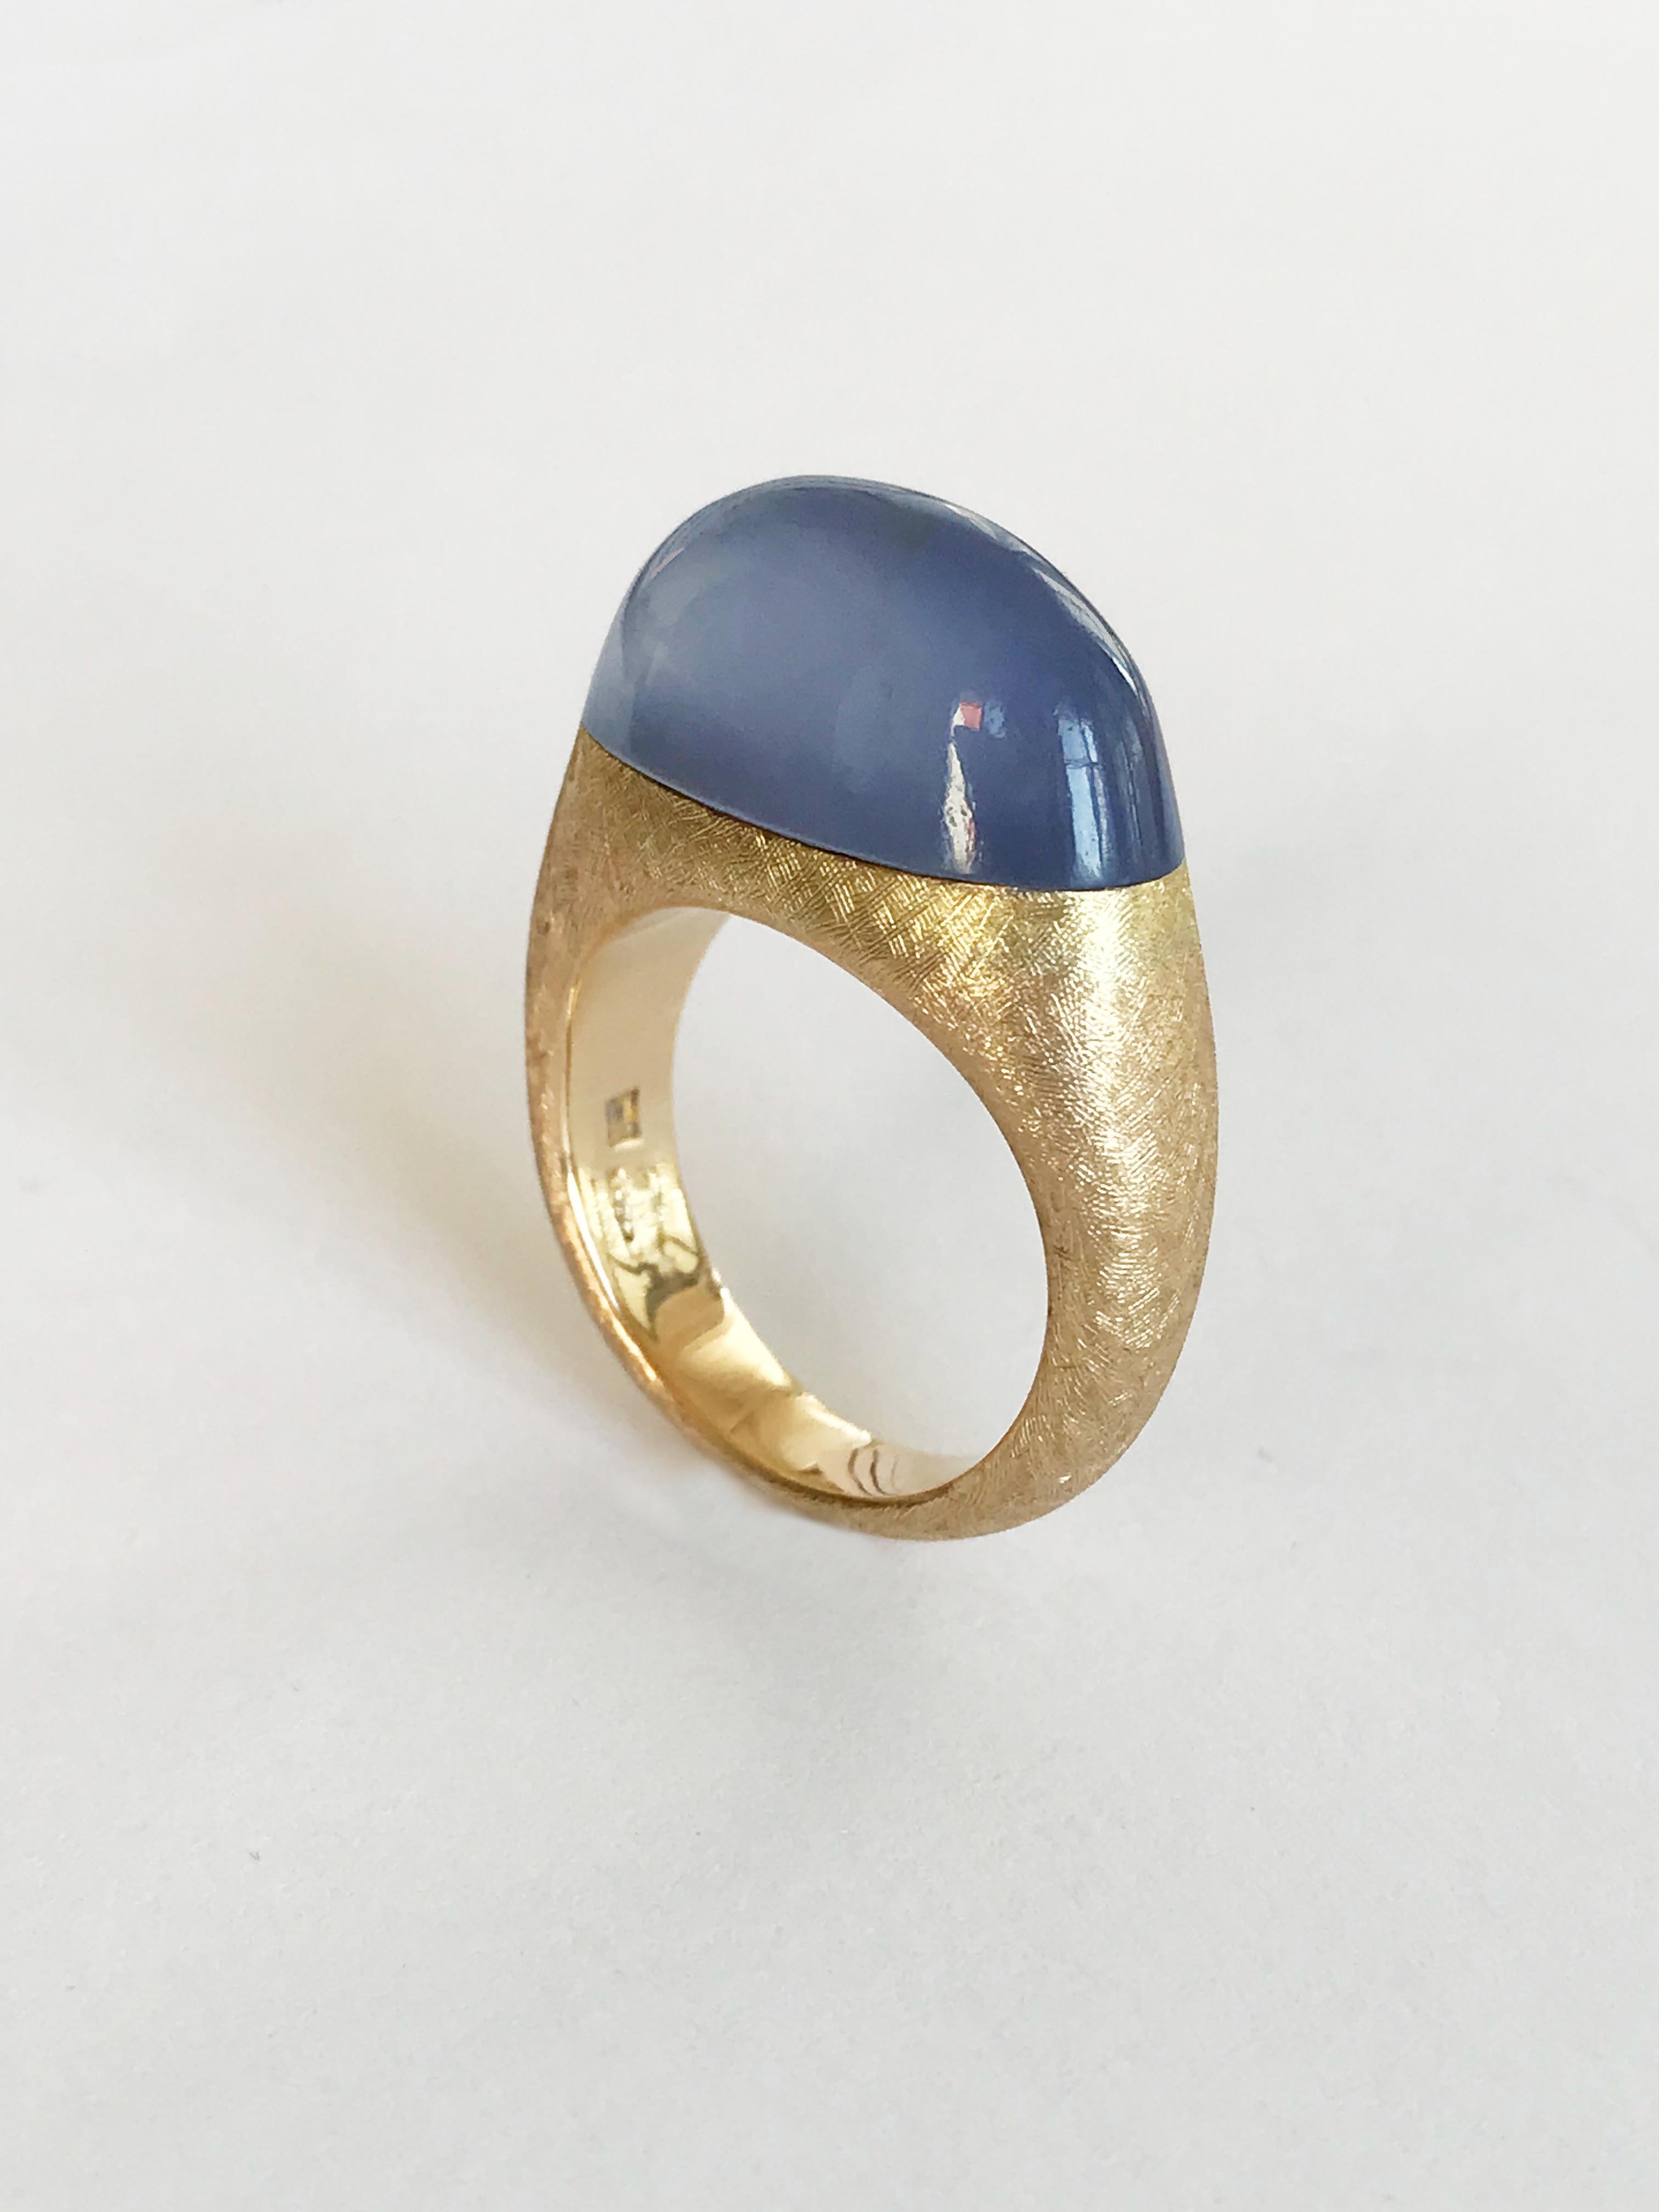 Dalben Namibian Chalcedony Gold Ring In New Condition For Sale In Como, IT